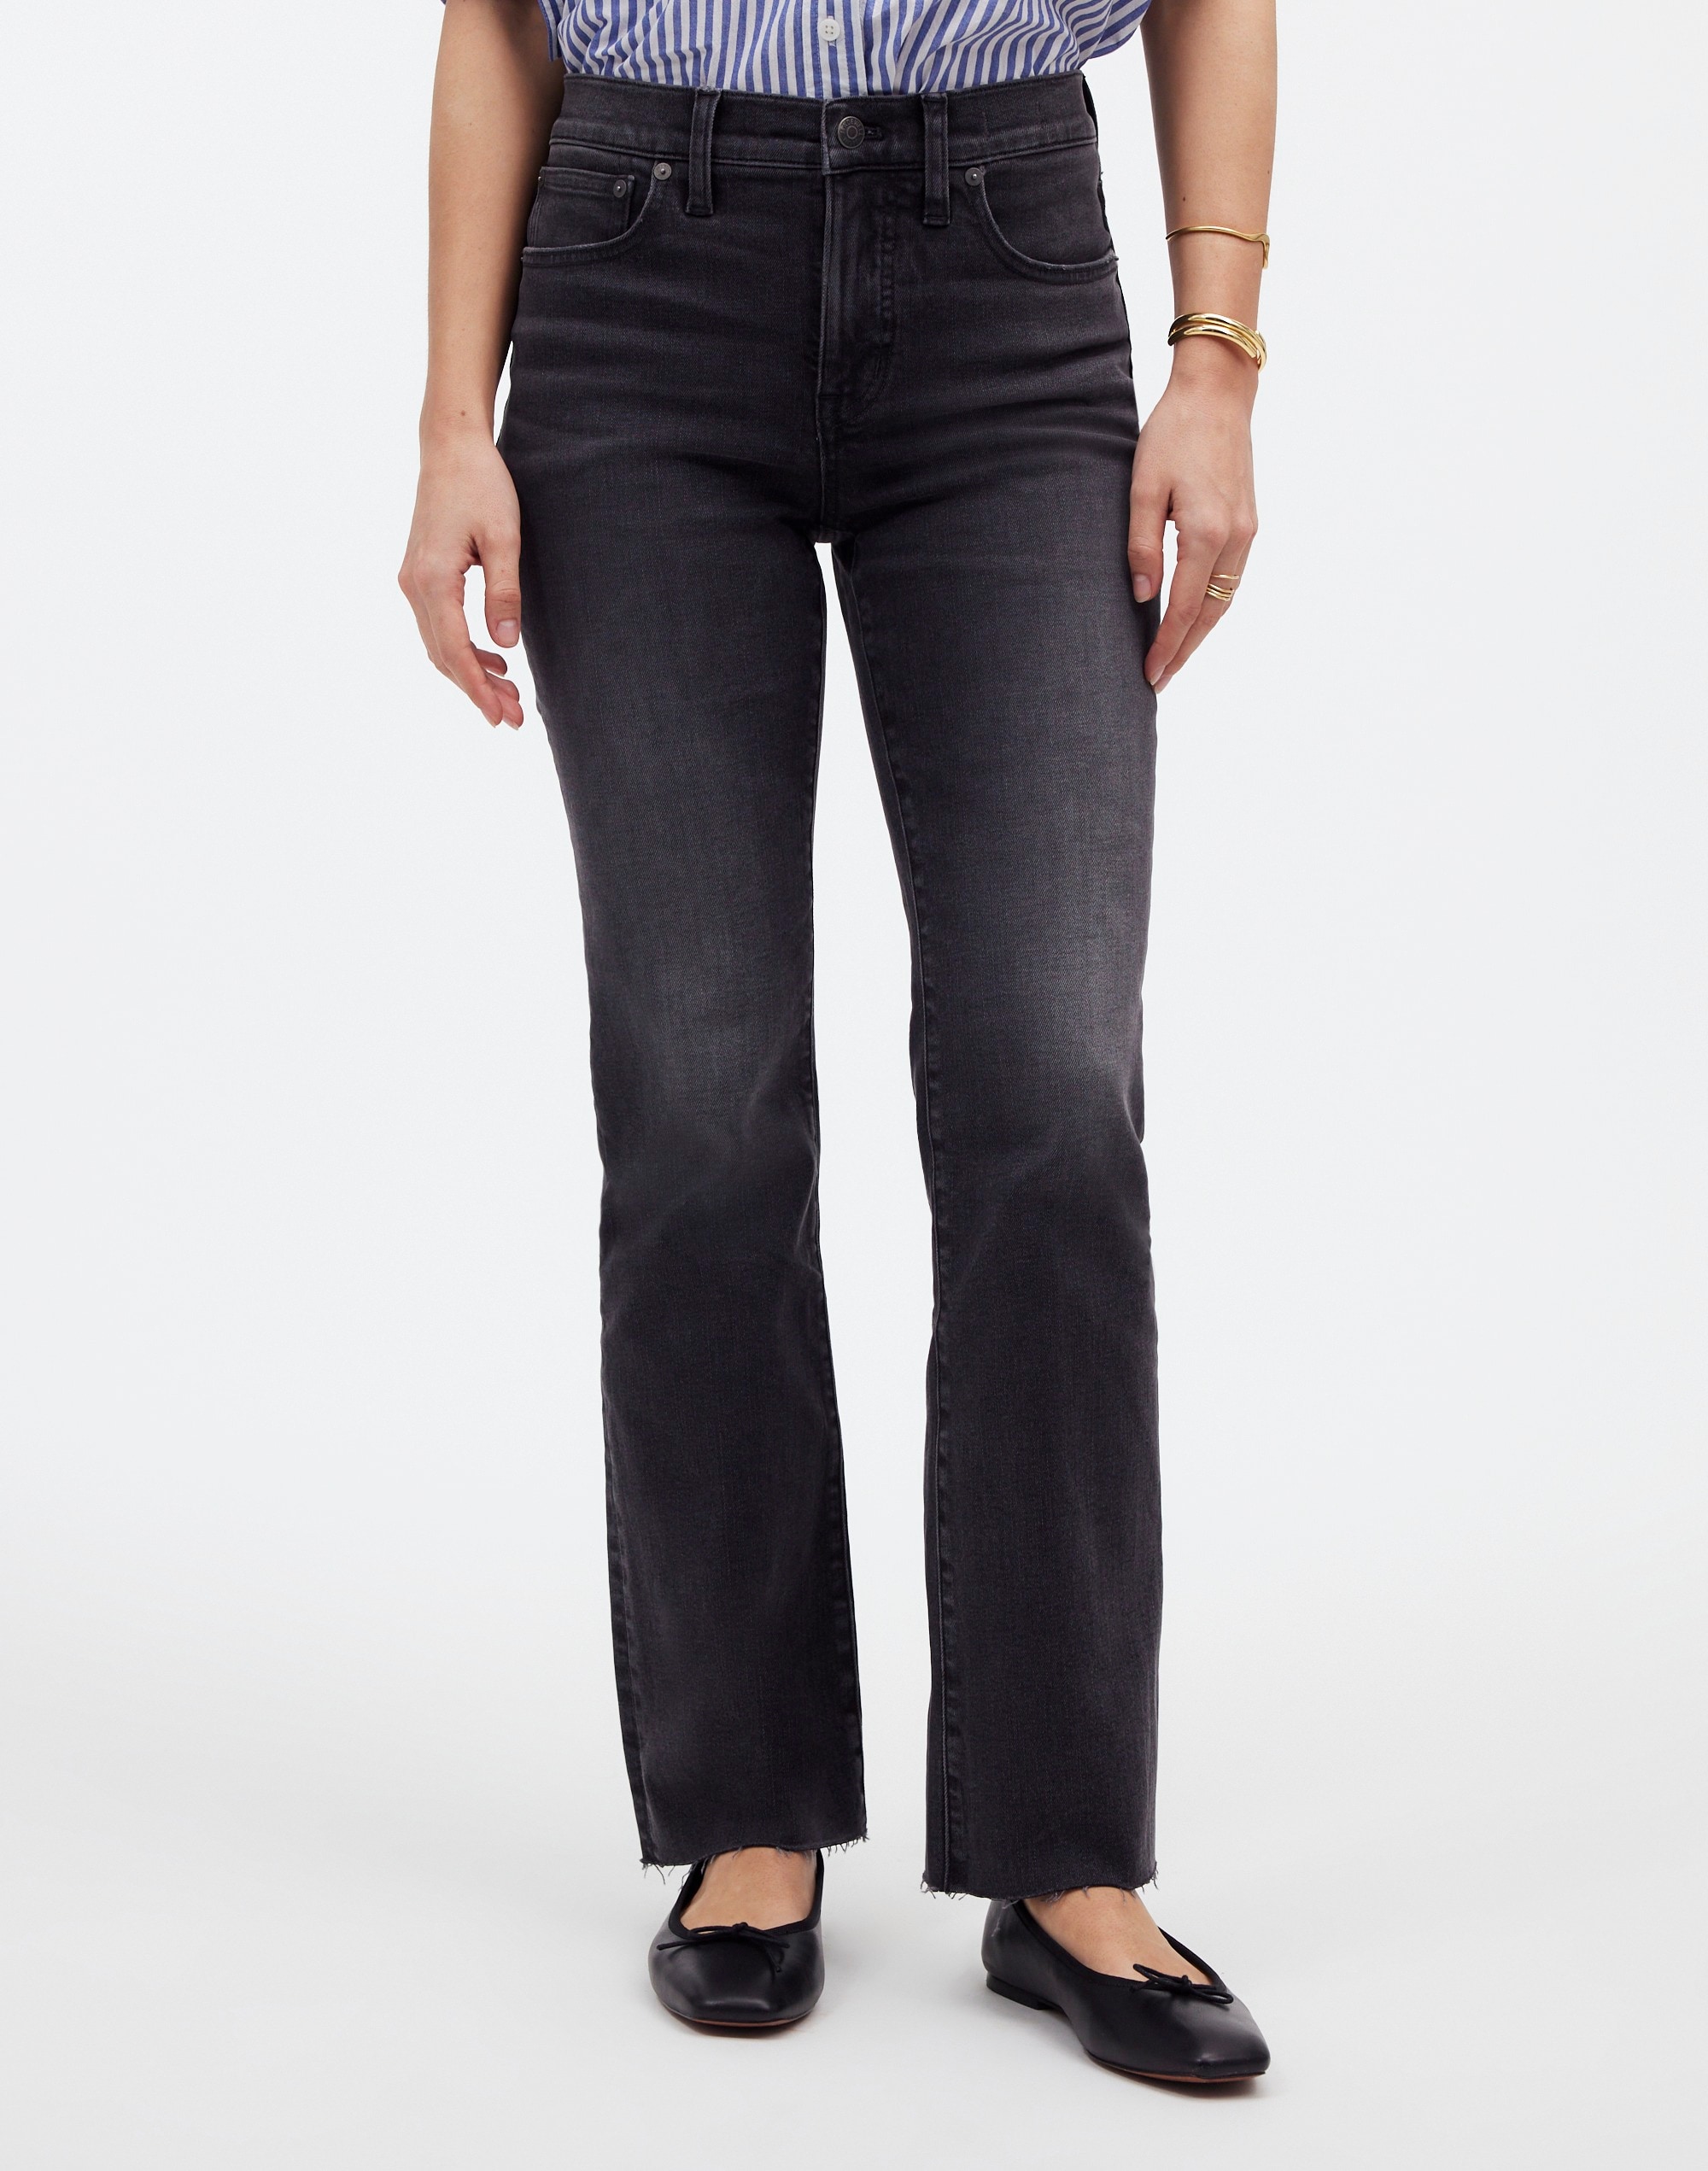 Petite Kick Out Crop Jeans Washed Black: Raw Hem Edition